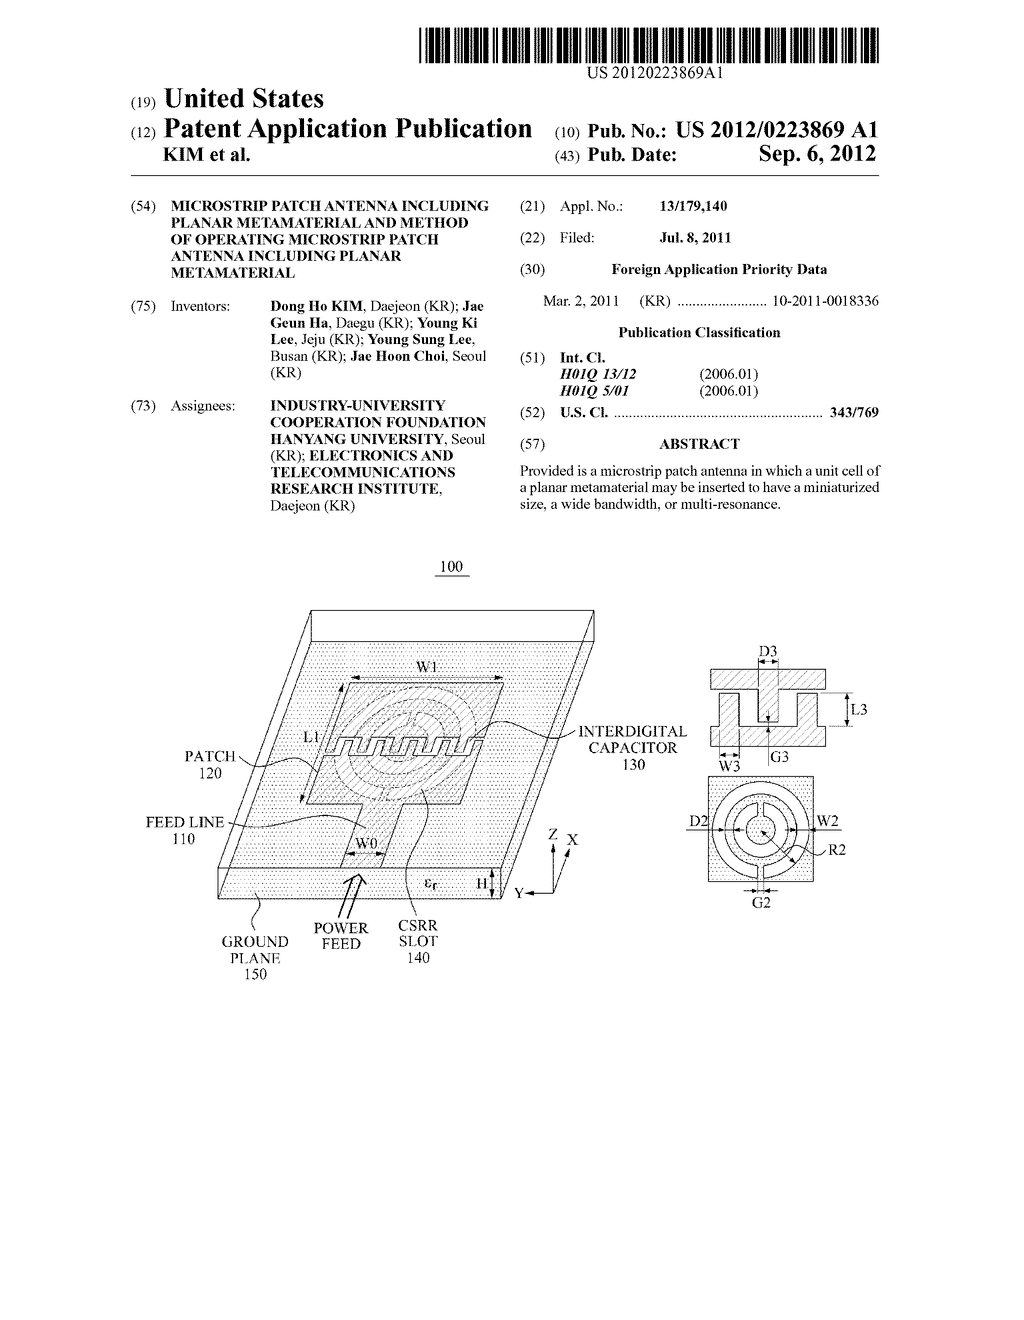 MICROSTRIP PATCH ANTENNA INCLUDING PLANAR METAMATERIAL AND METHOD OF     OPERATING MICROSTRIP PATCH ANTENNA INCLUDING PLANAR METAMATERIAL - diagram, schematic, and image 01